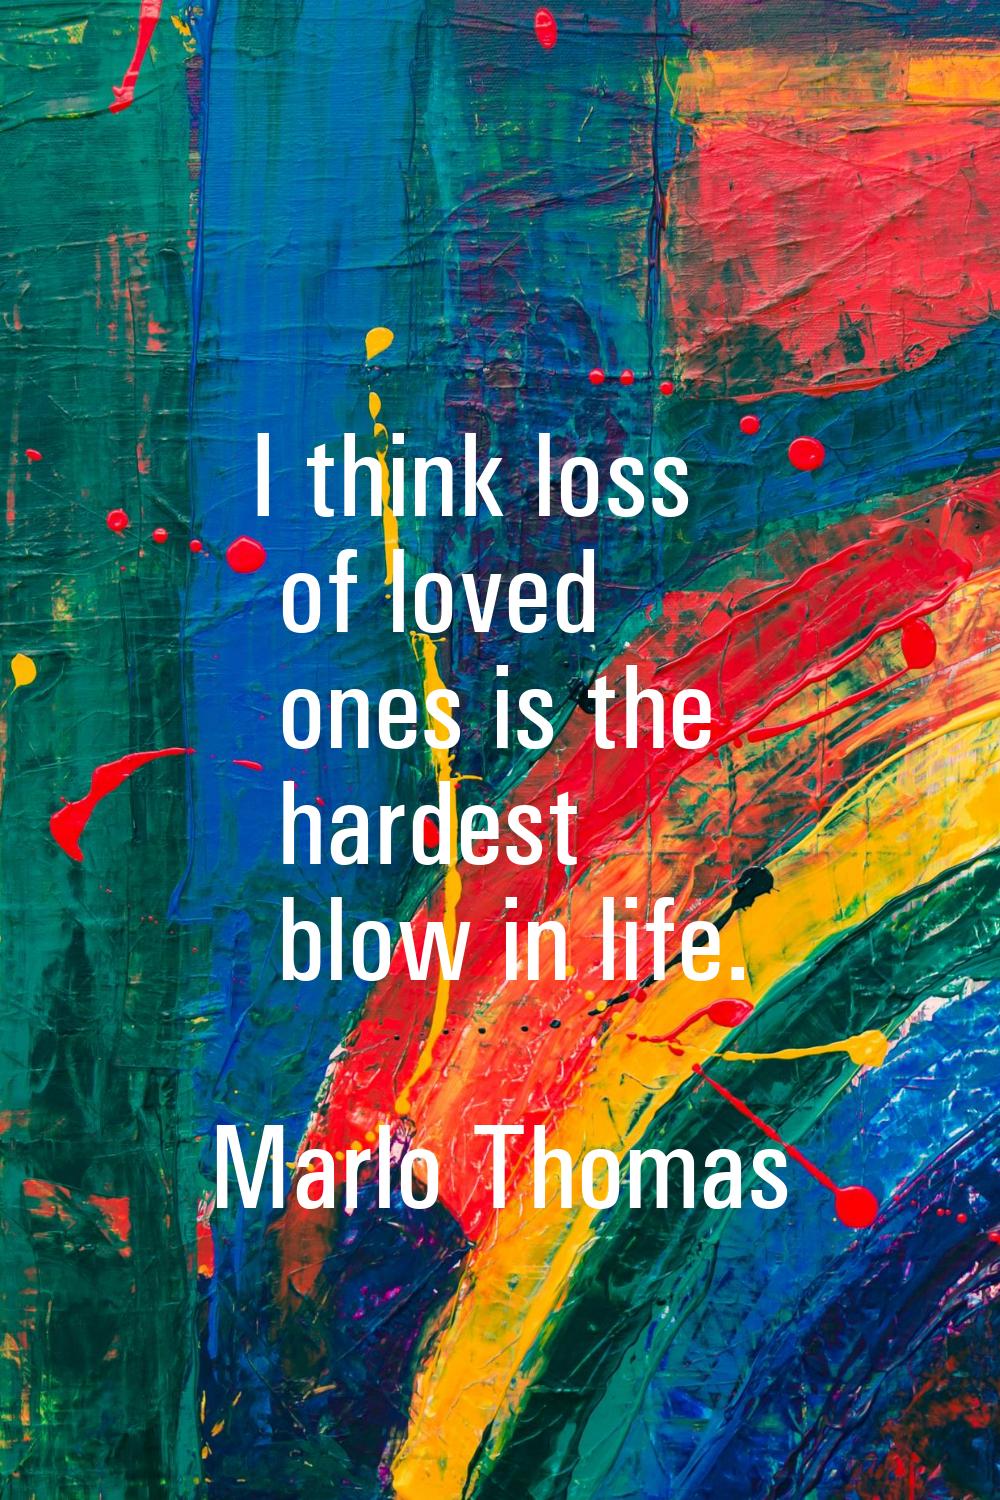 I think loss of loved ones is the hardest blow in life.